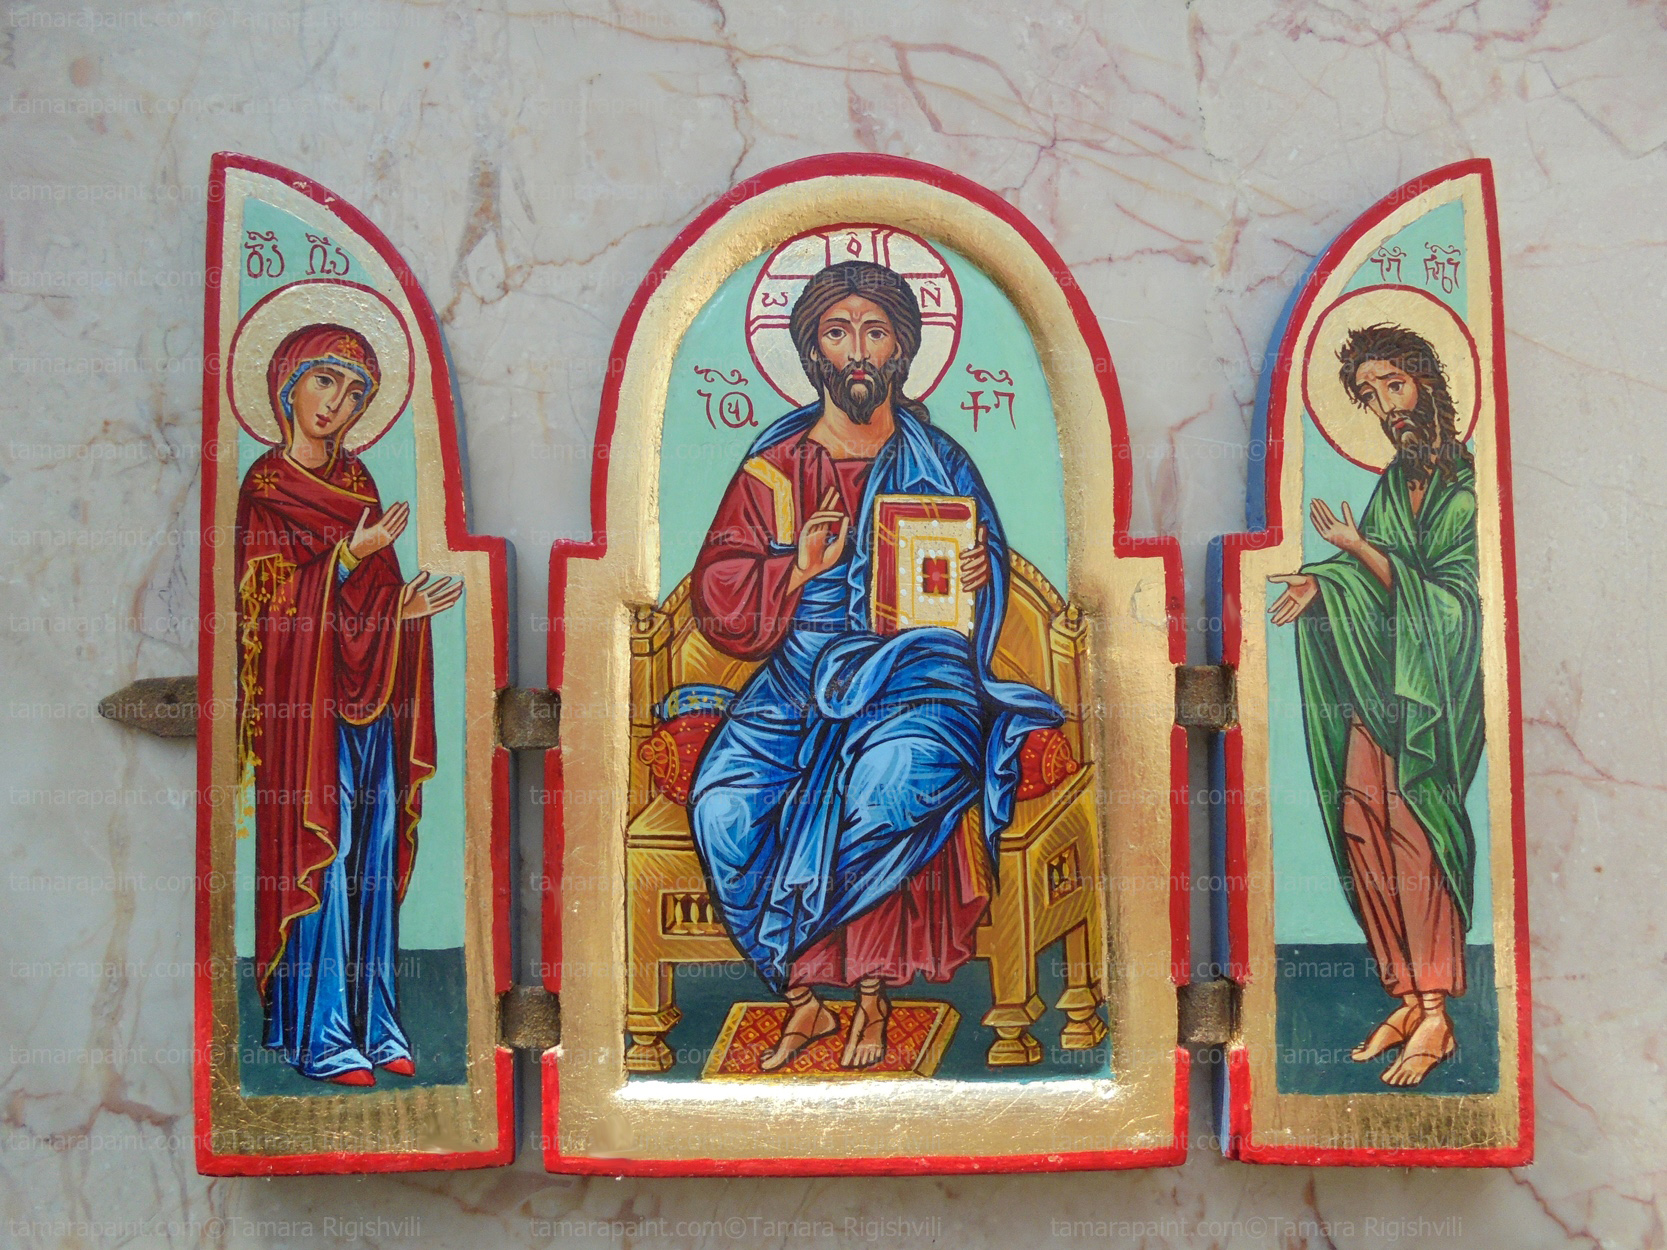 Savior with Virgin Mary and John the Baptist, tryptich open wings icon handpainted on Wood, original icon painting by artist Tamara Rigishvili